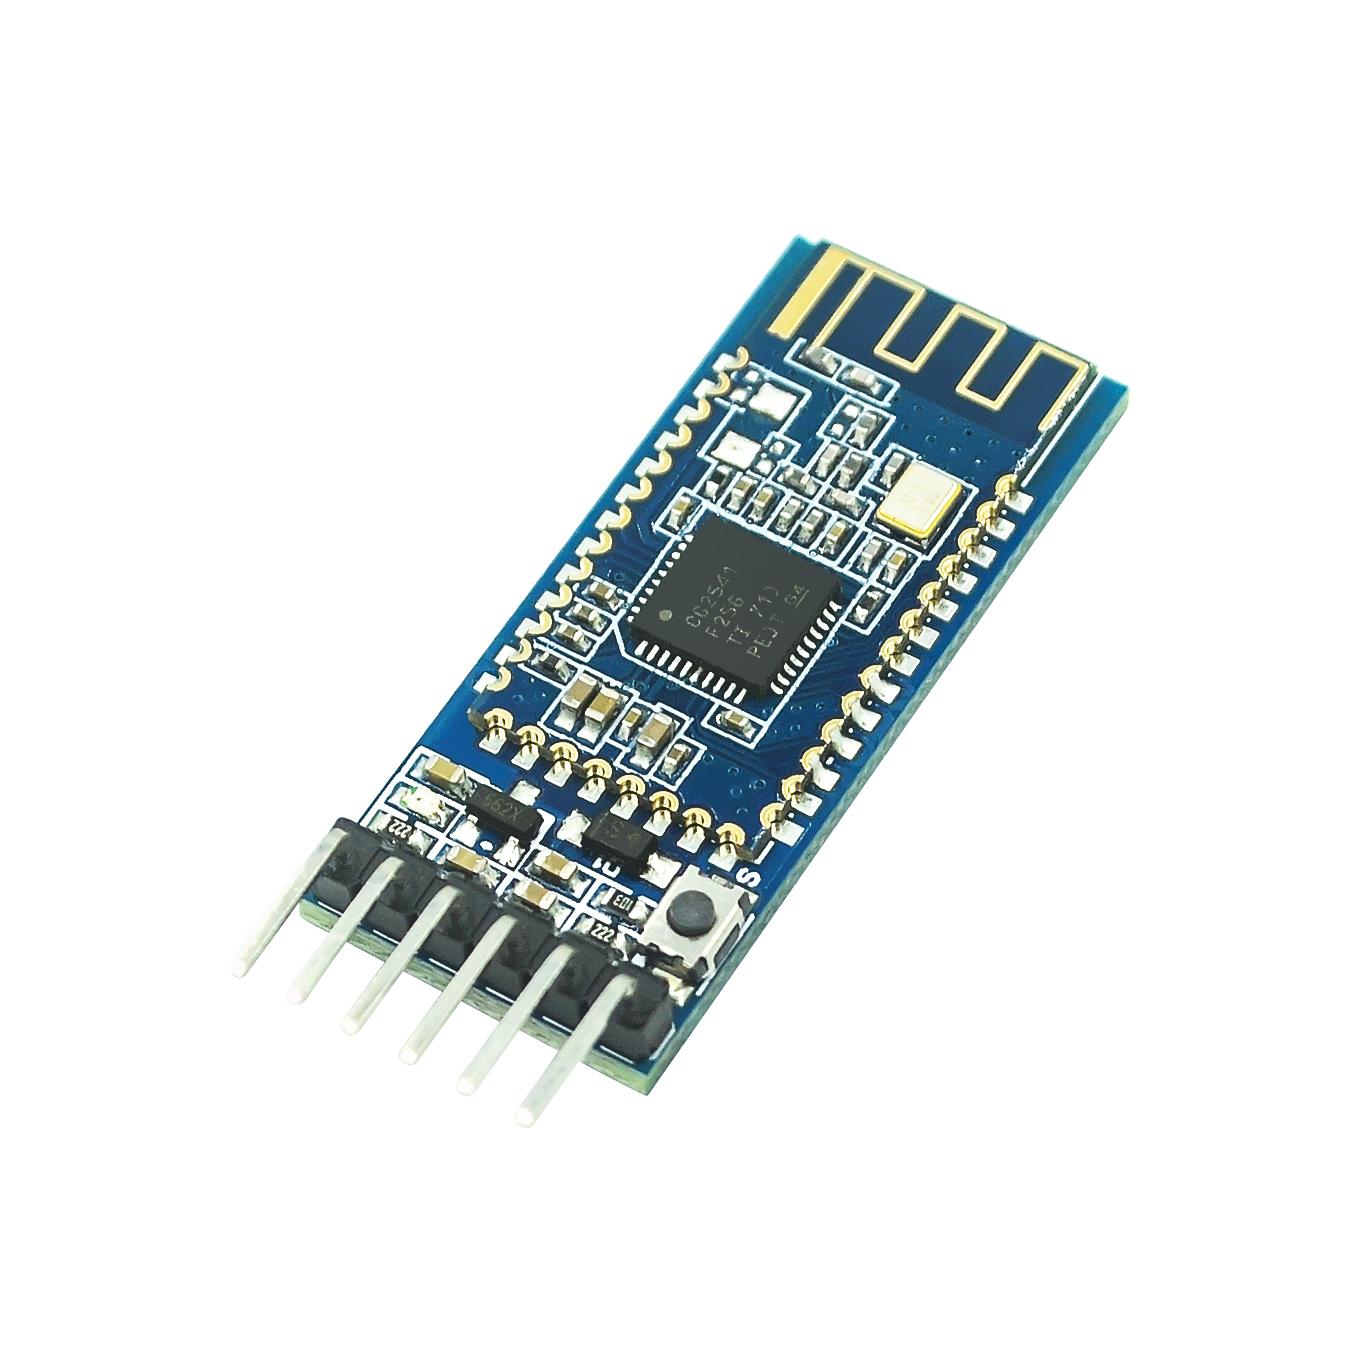 10pcs/lot AT-09 Android IOS BLE 4.0 Bluetooth module for arduino CC2540 CC2541 Serial Wireless Module compatible HM-10